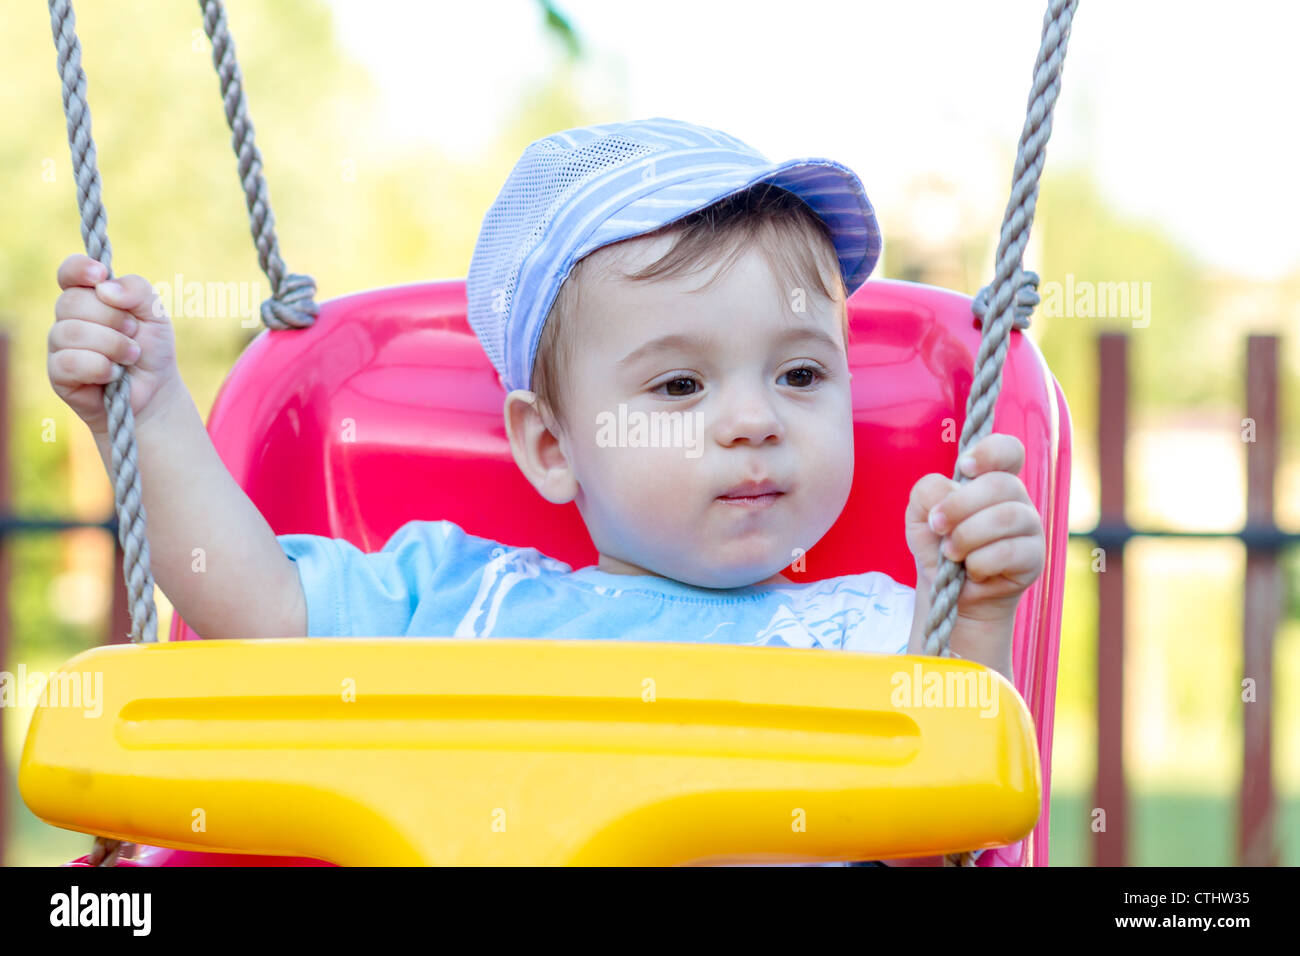 9-month old baby boy with blue hat in a swing outdoors Stock Photo